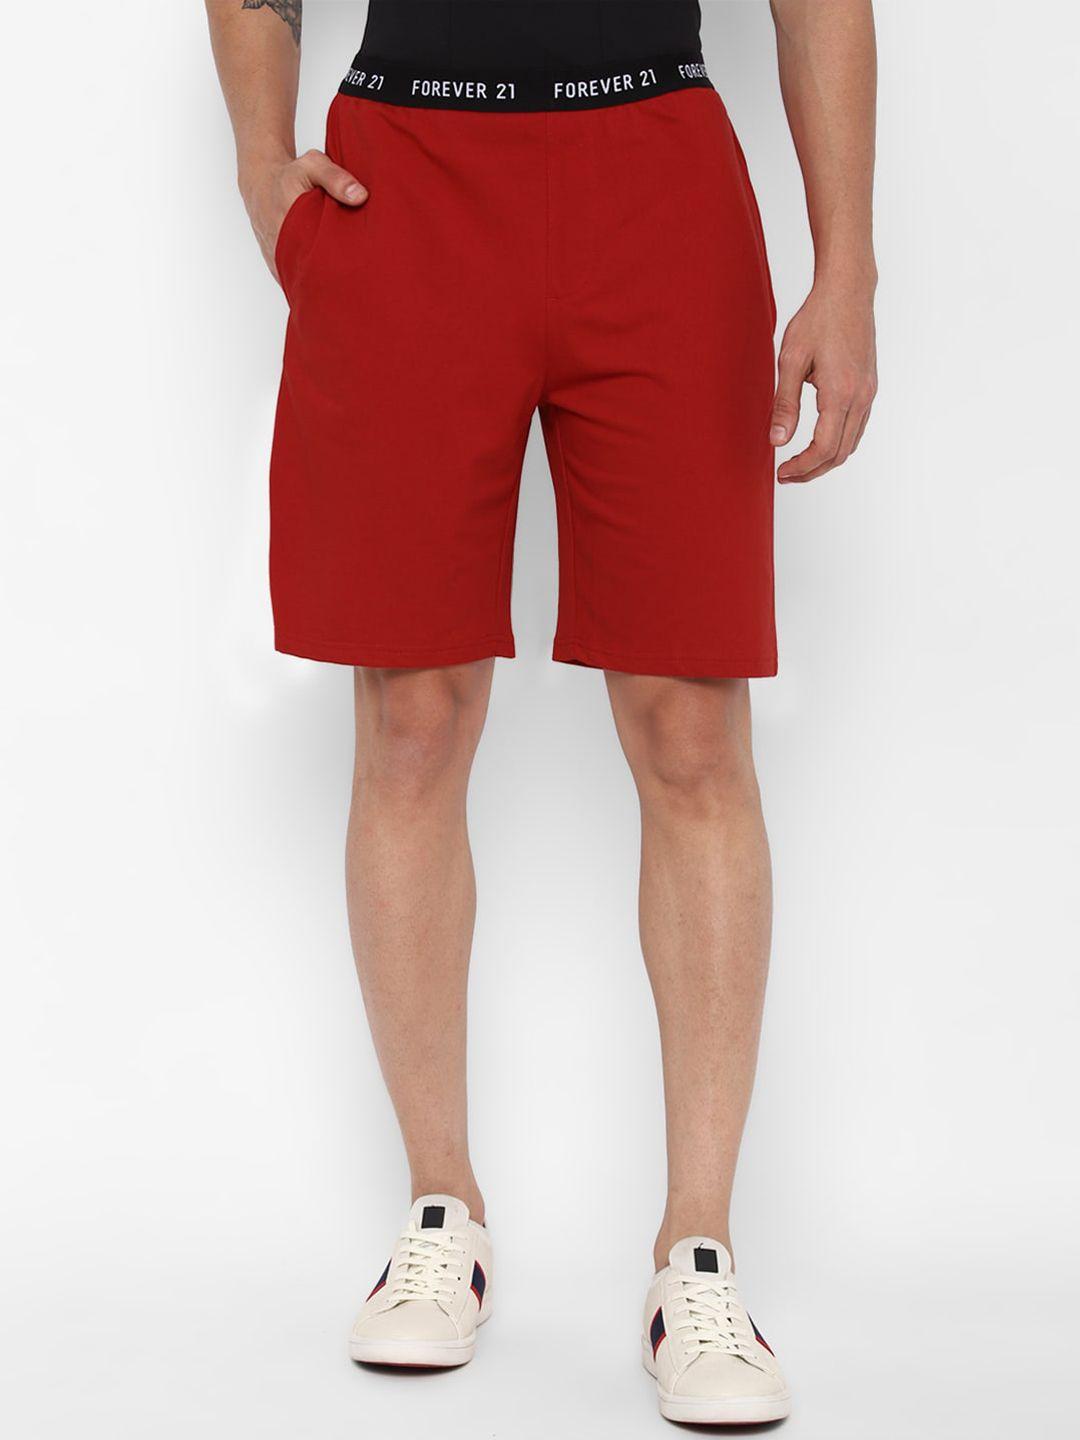 forever-21-men-red-sports-shorts